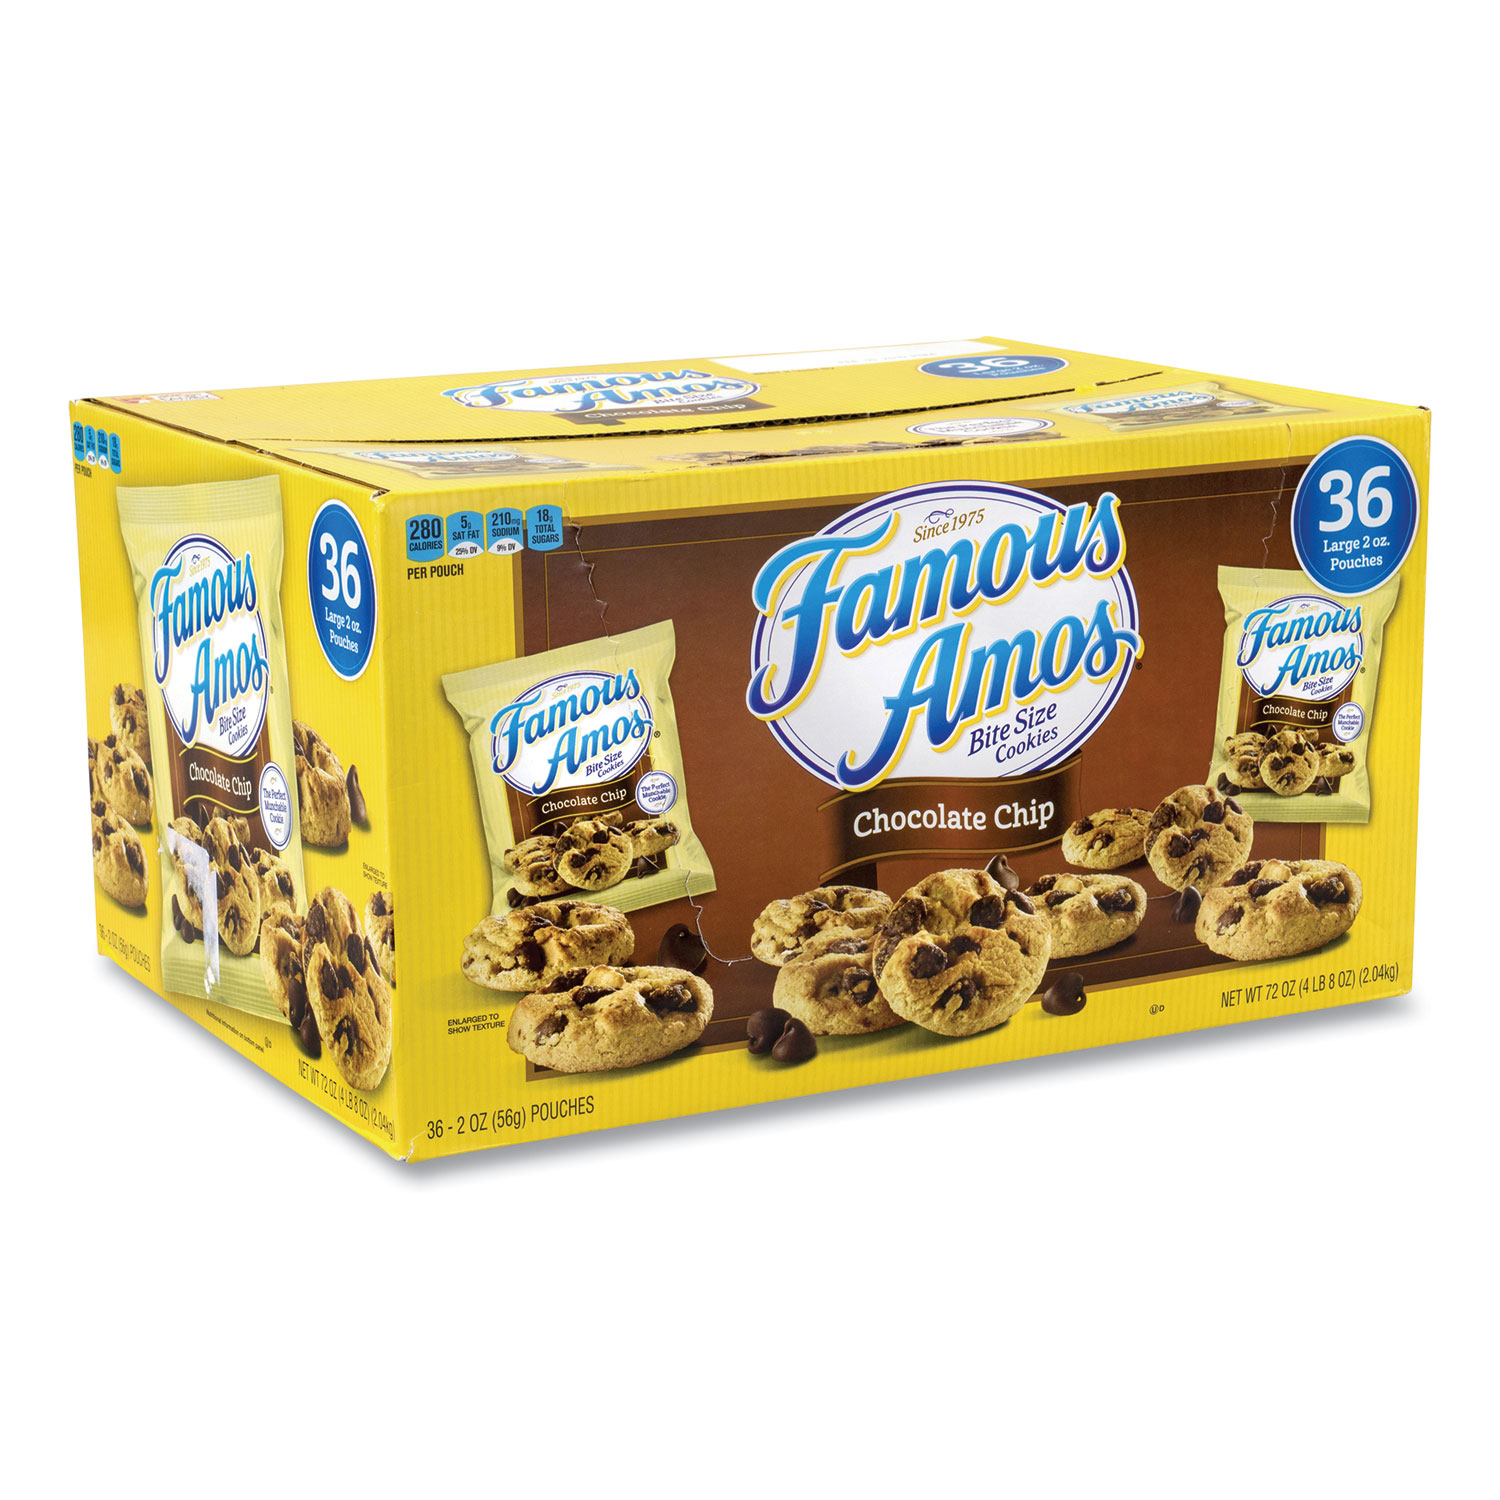 Kelloggs® Famous Amos Cookies, Chocolate Chip, 2 oz Bag, 60/Carton, Free Delivery in 1-4 Business Days